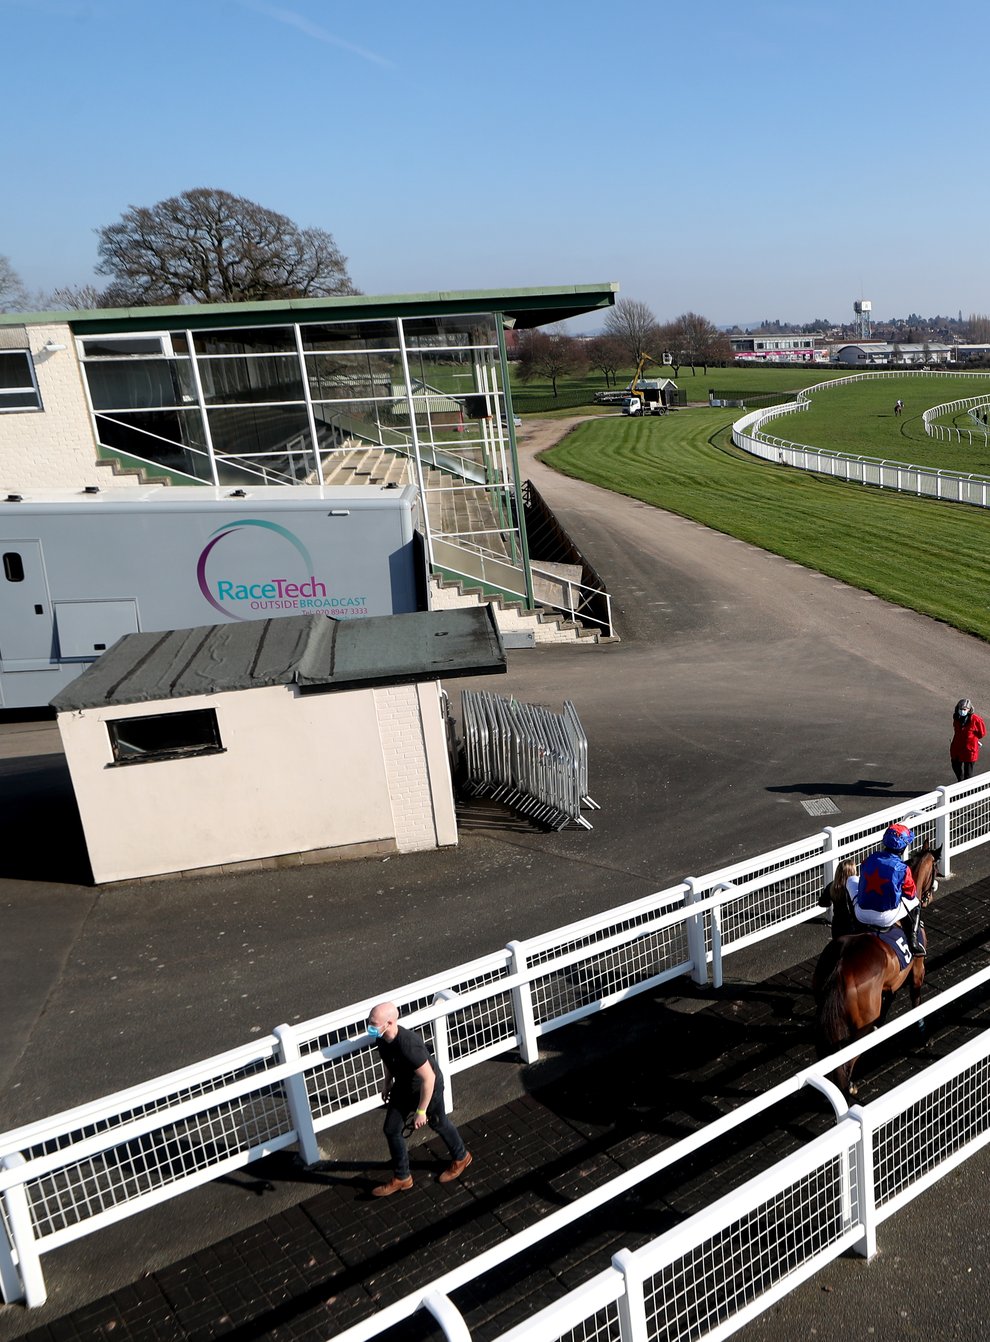 Sunday's card at Hereford has been abandoned